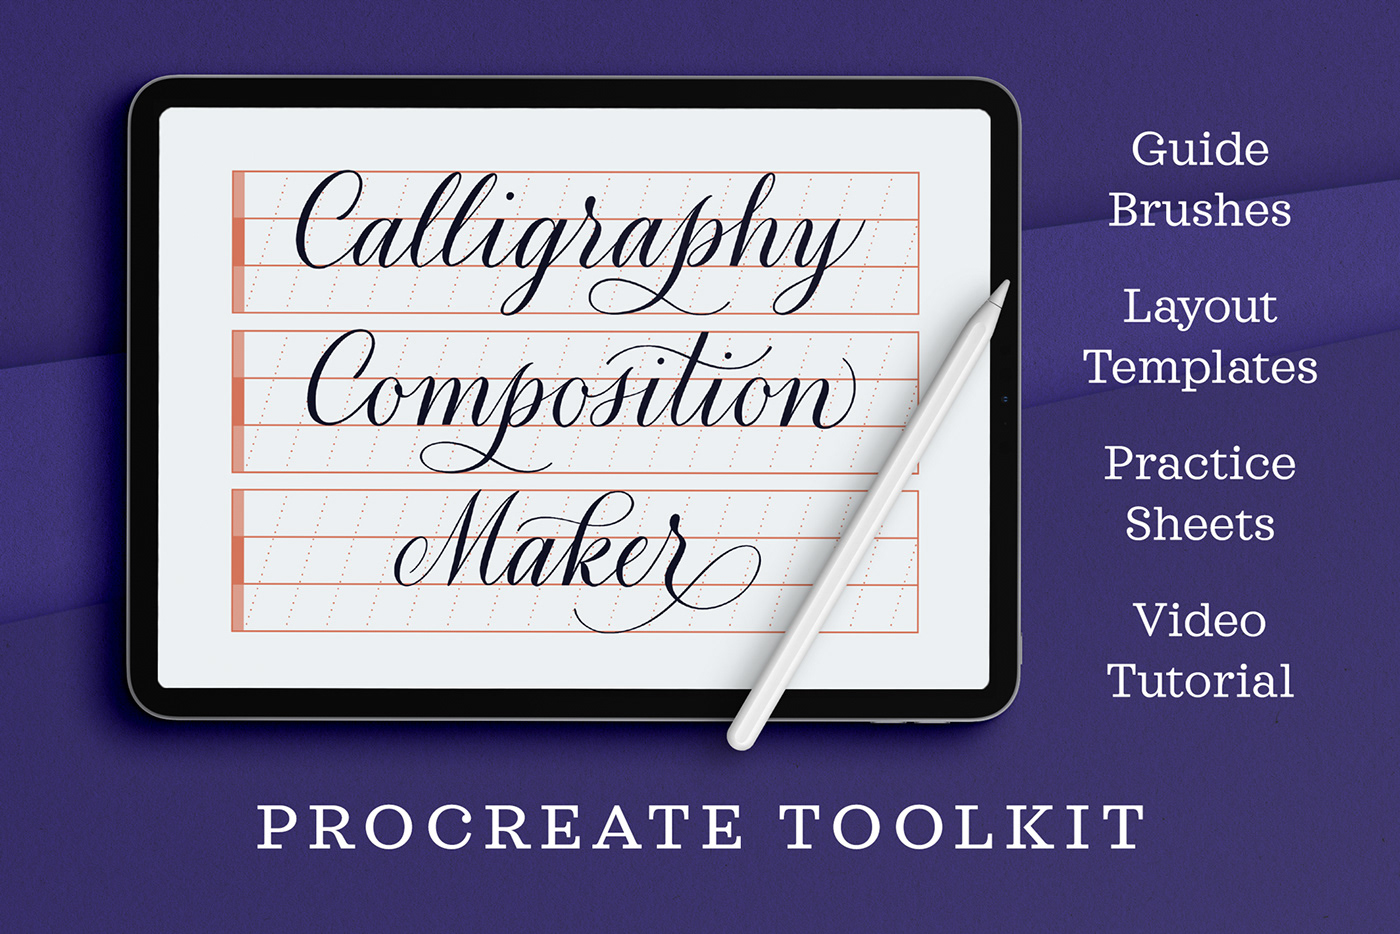 Calligraphy   calligraphy supplies Composition Maker digital lettering HAND LETTERING iPad Lettering lettering modern calligraphy Procreate procreate brushes